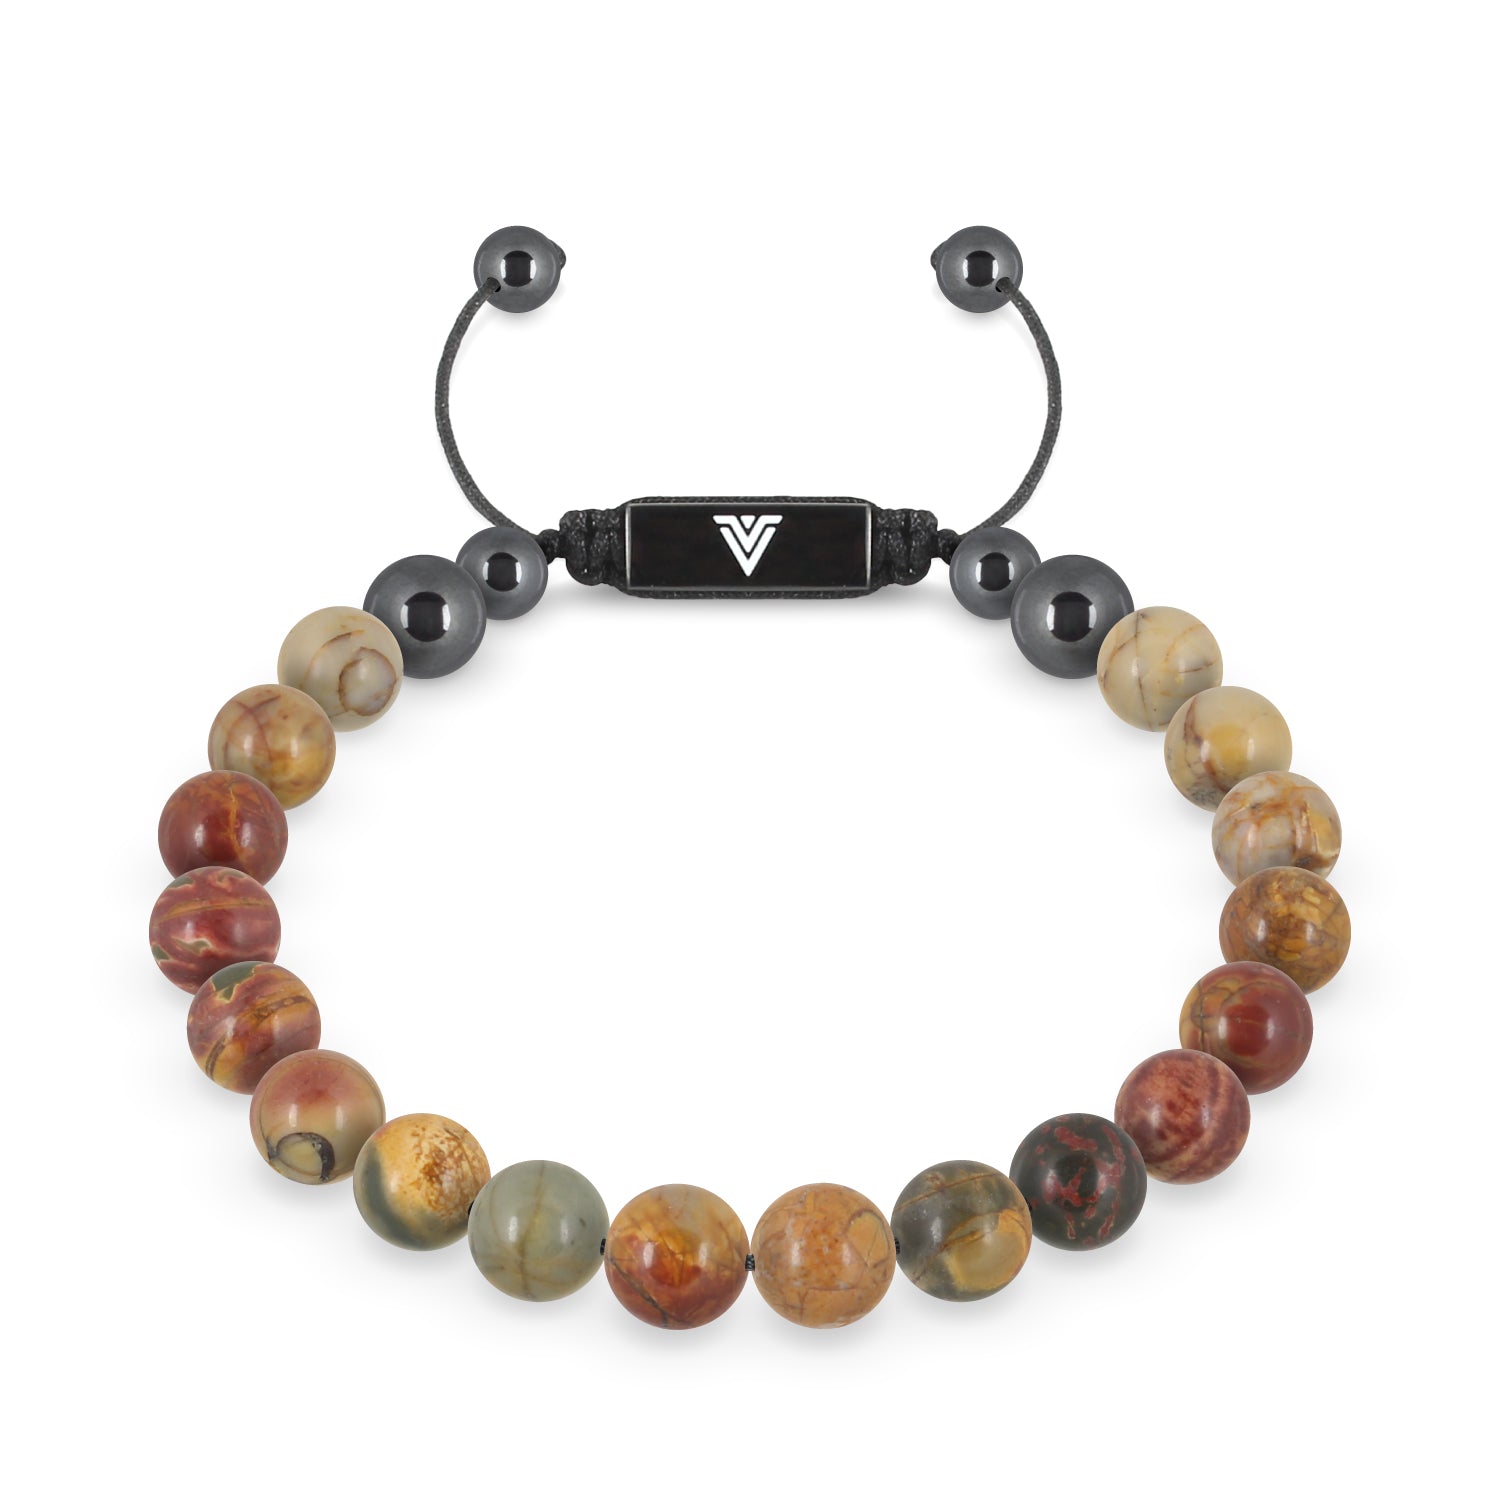 Front view of an 8mm Red Creek Jasper crystal beaded shamballa bracelet with black stainless steel logo bead made by Voltlin